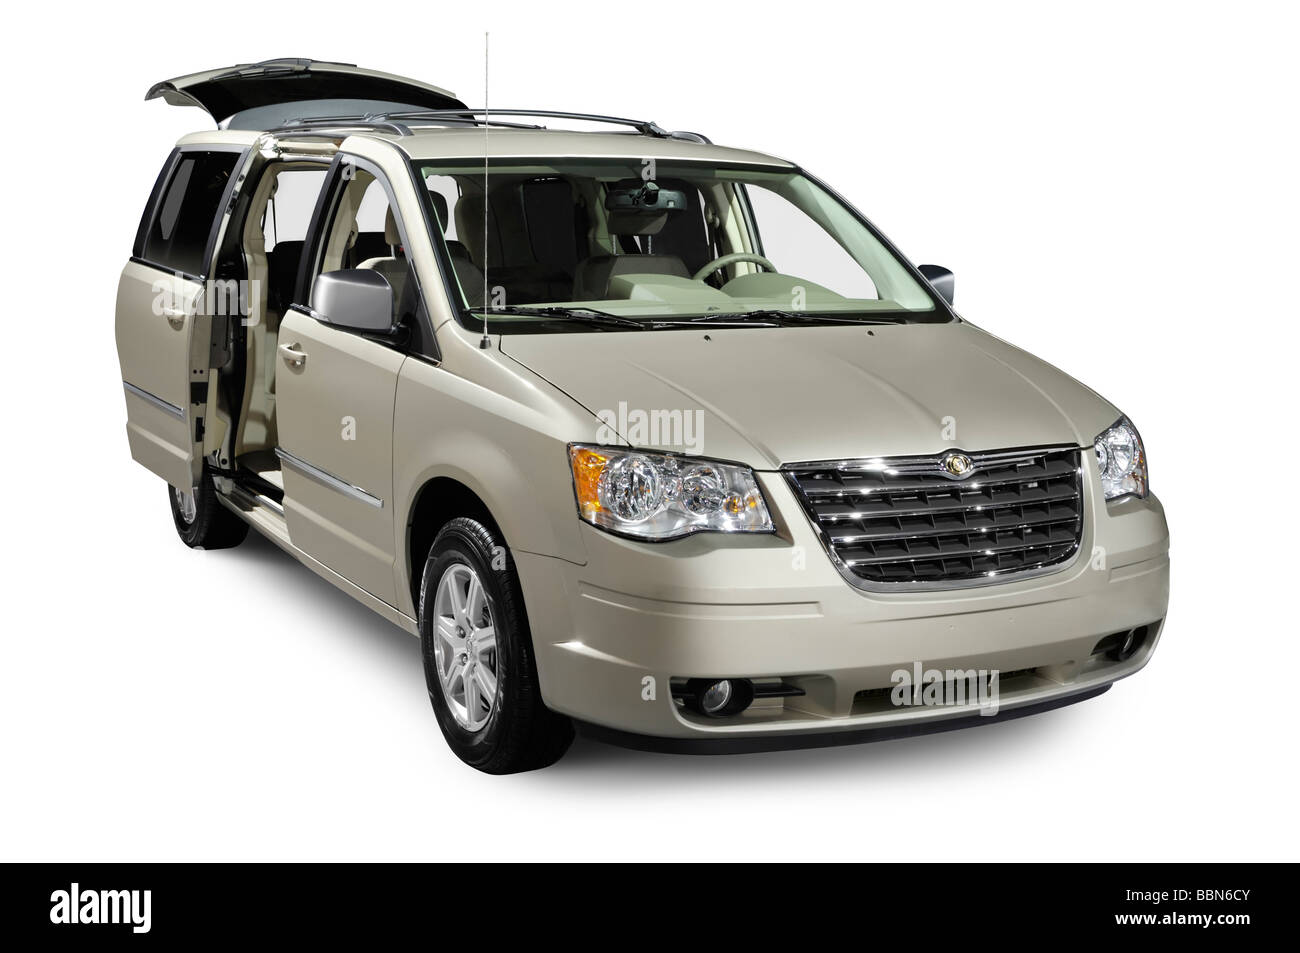 2009 Chrysler Town and Country Minivan Stock Photo